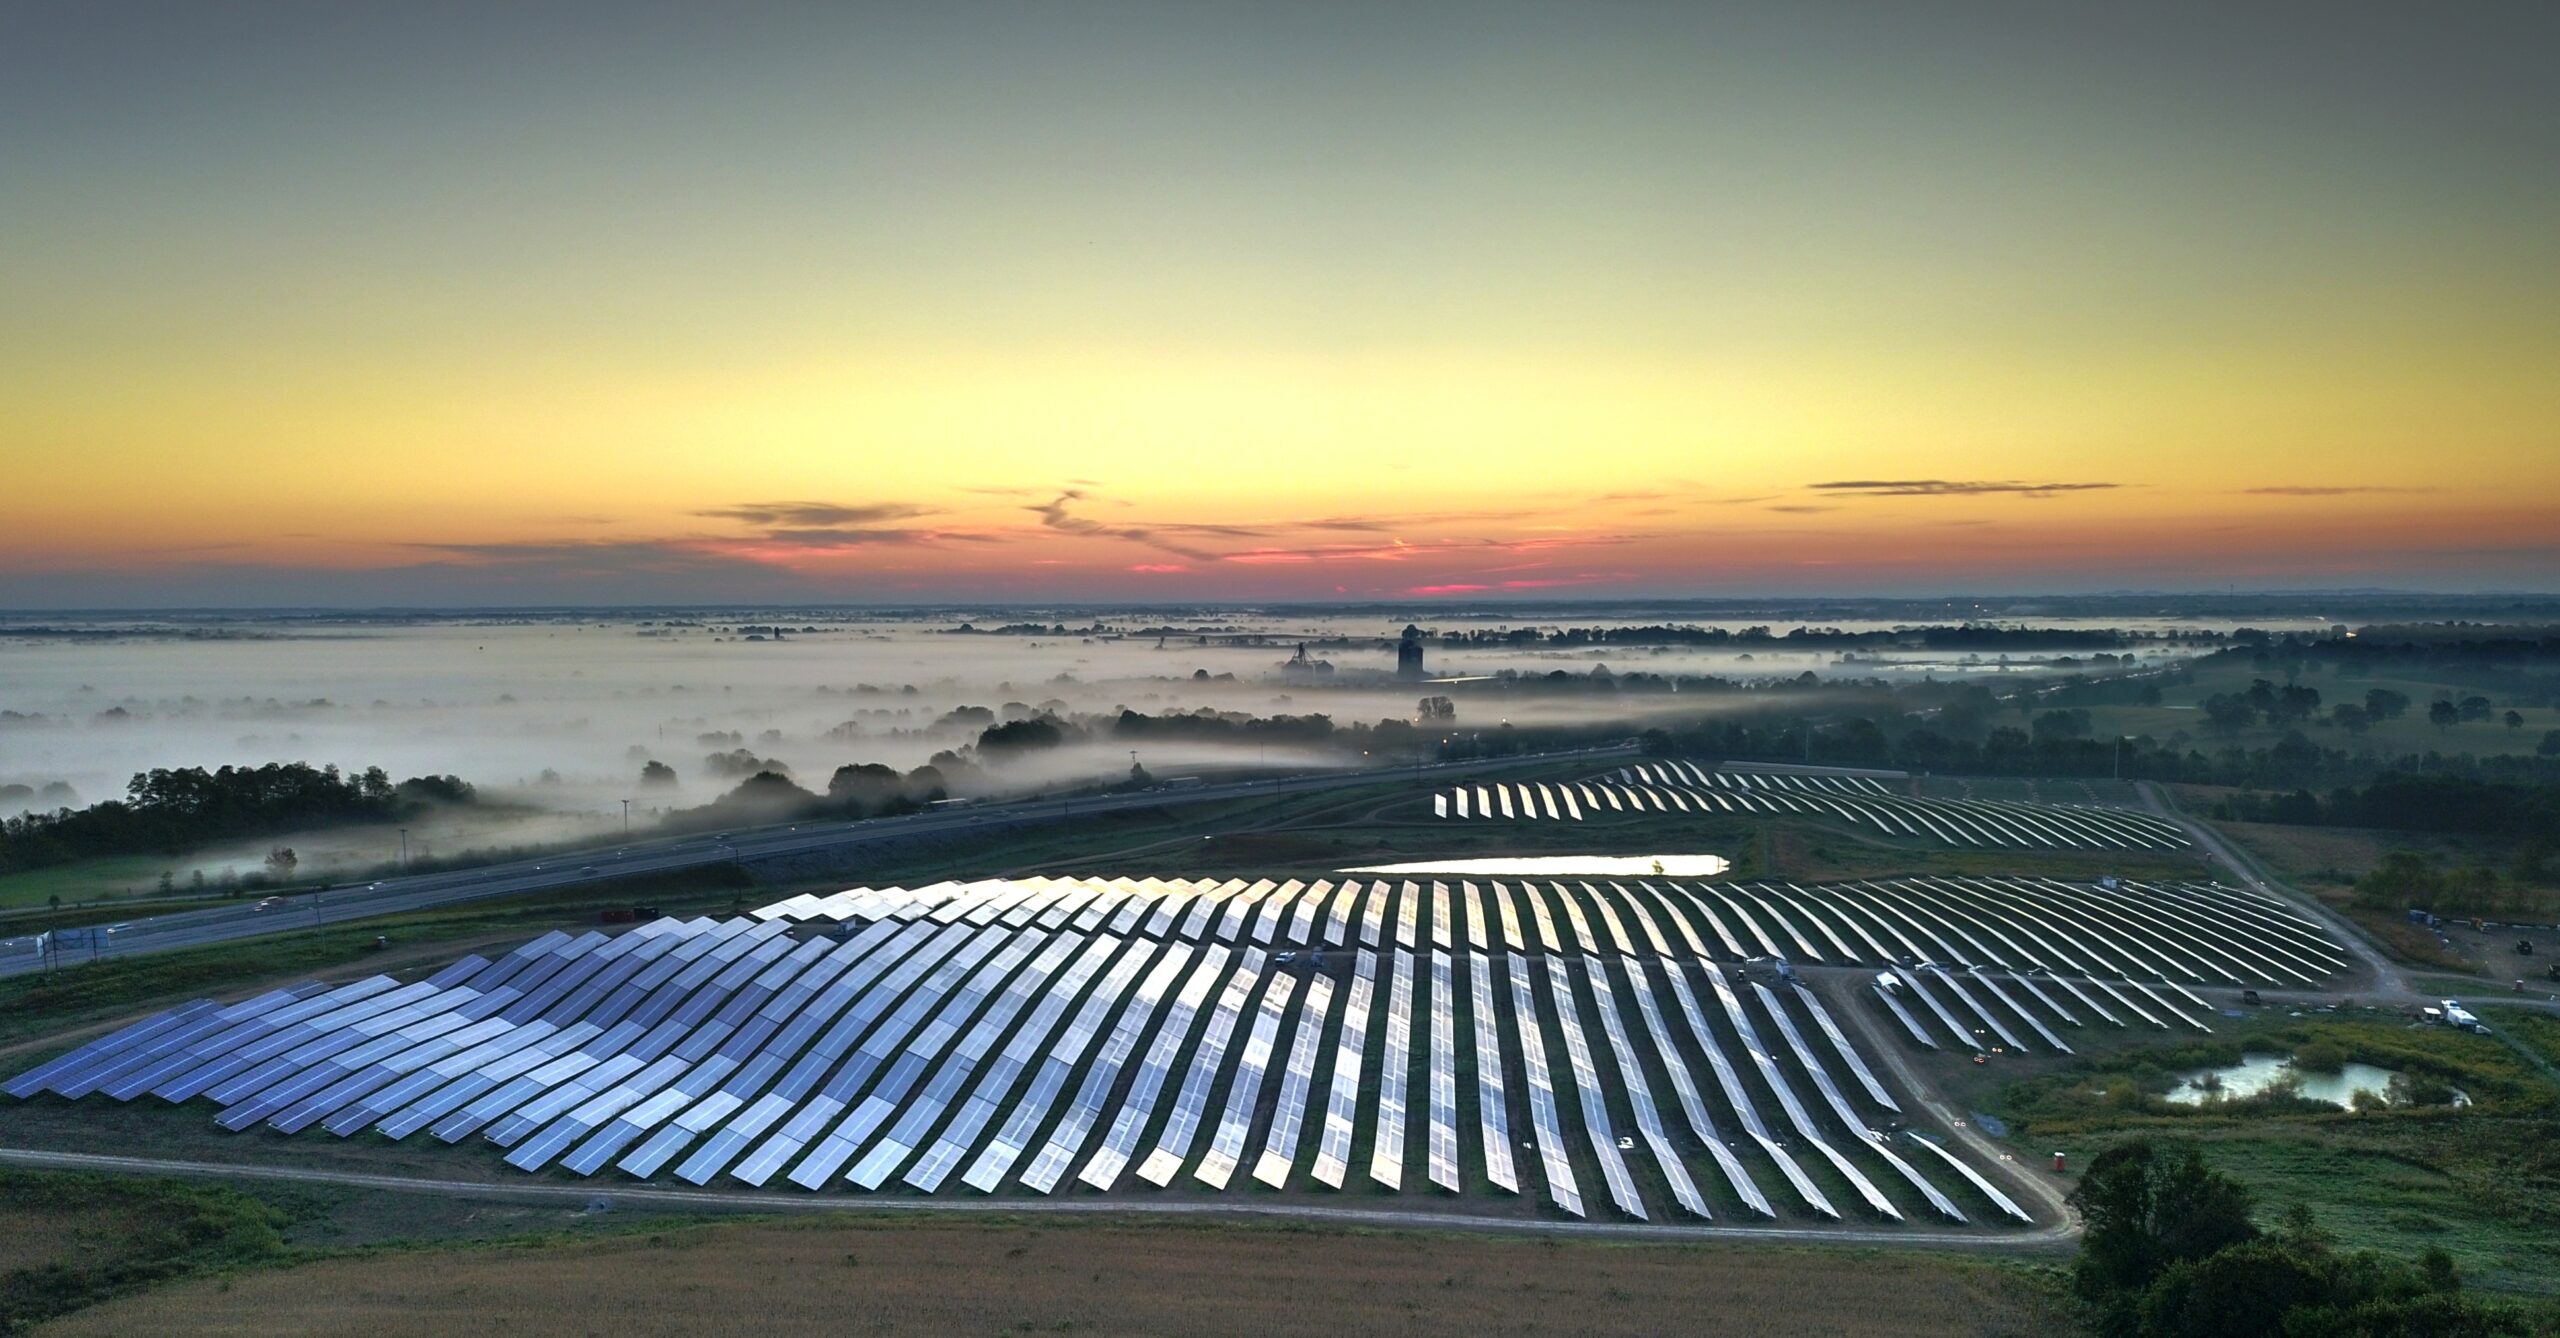 The sun rises over a solar farm, casting a warm glow on the rows of solar panels as misty fog blankets the surrounding landscape.